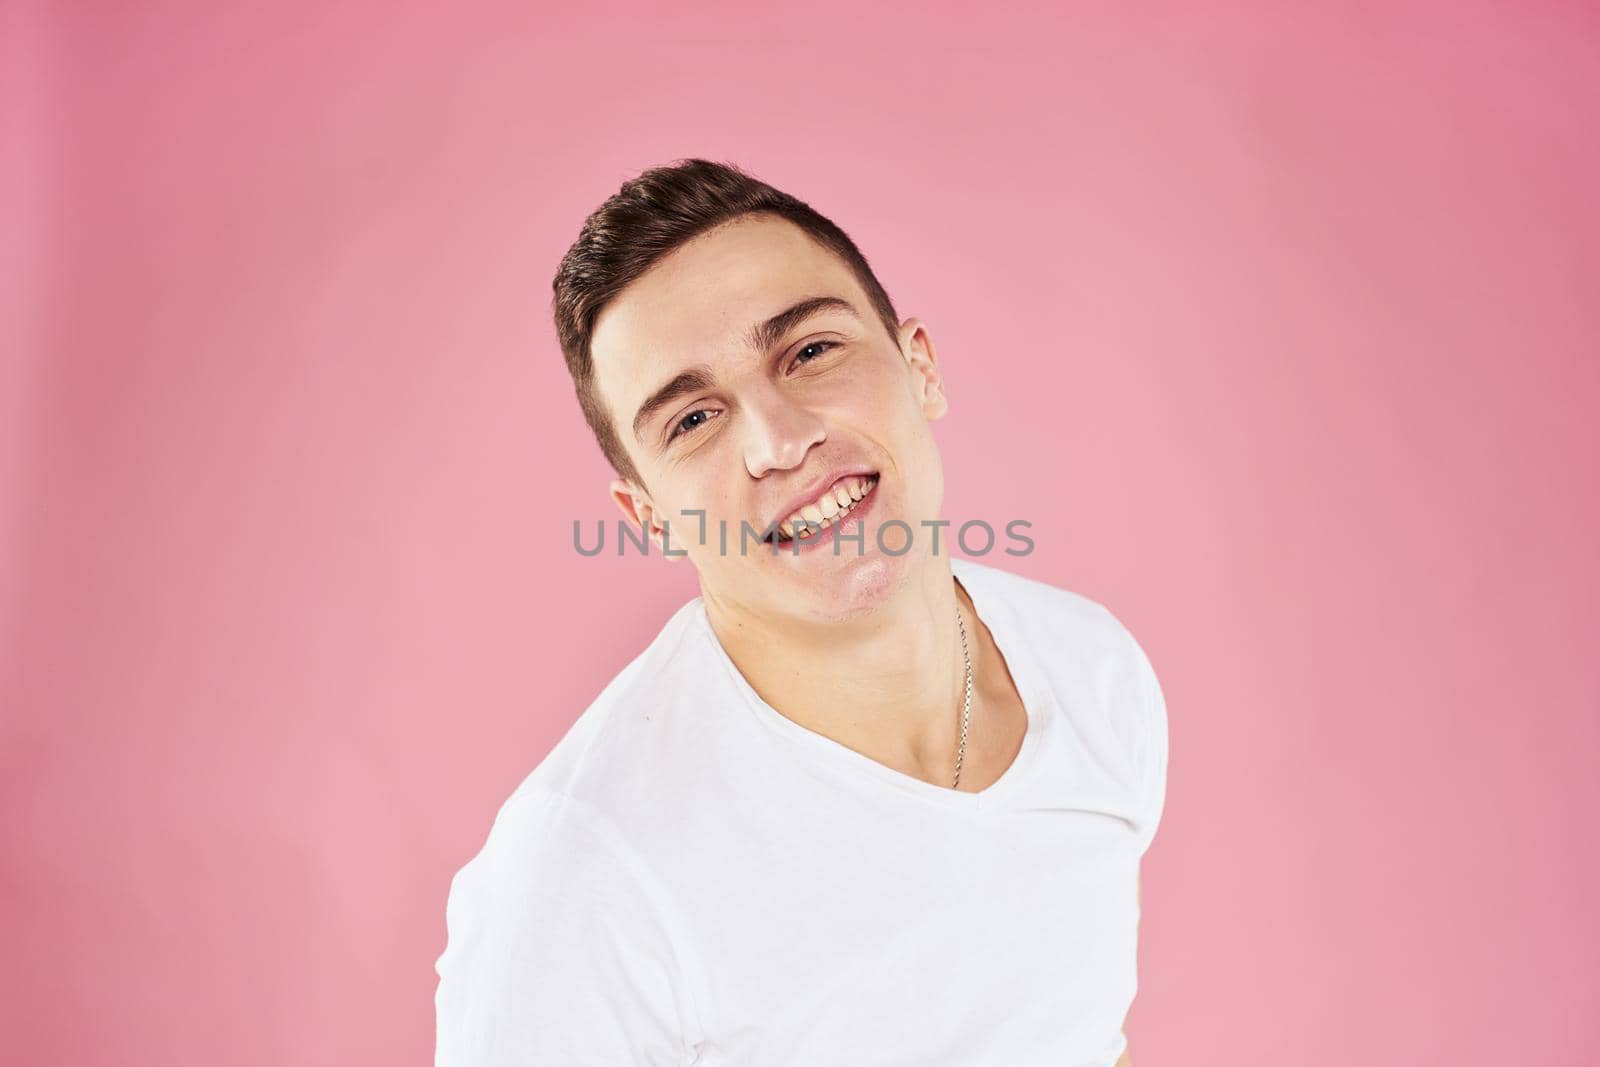 A man in a white t-shirt gestures with his hands emotions pink background studio cropped view by SHOTPRIME